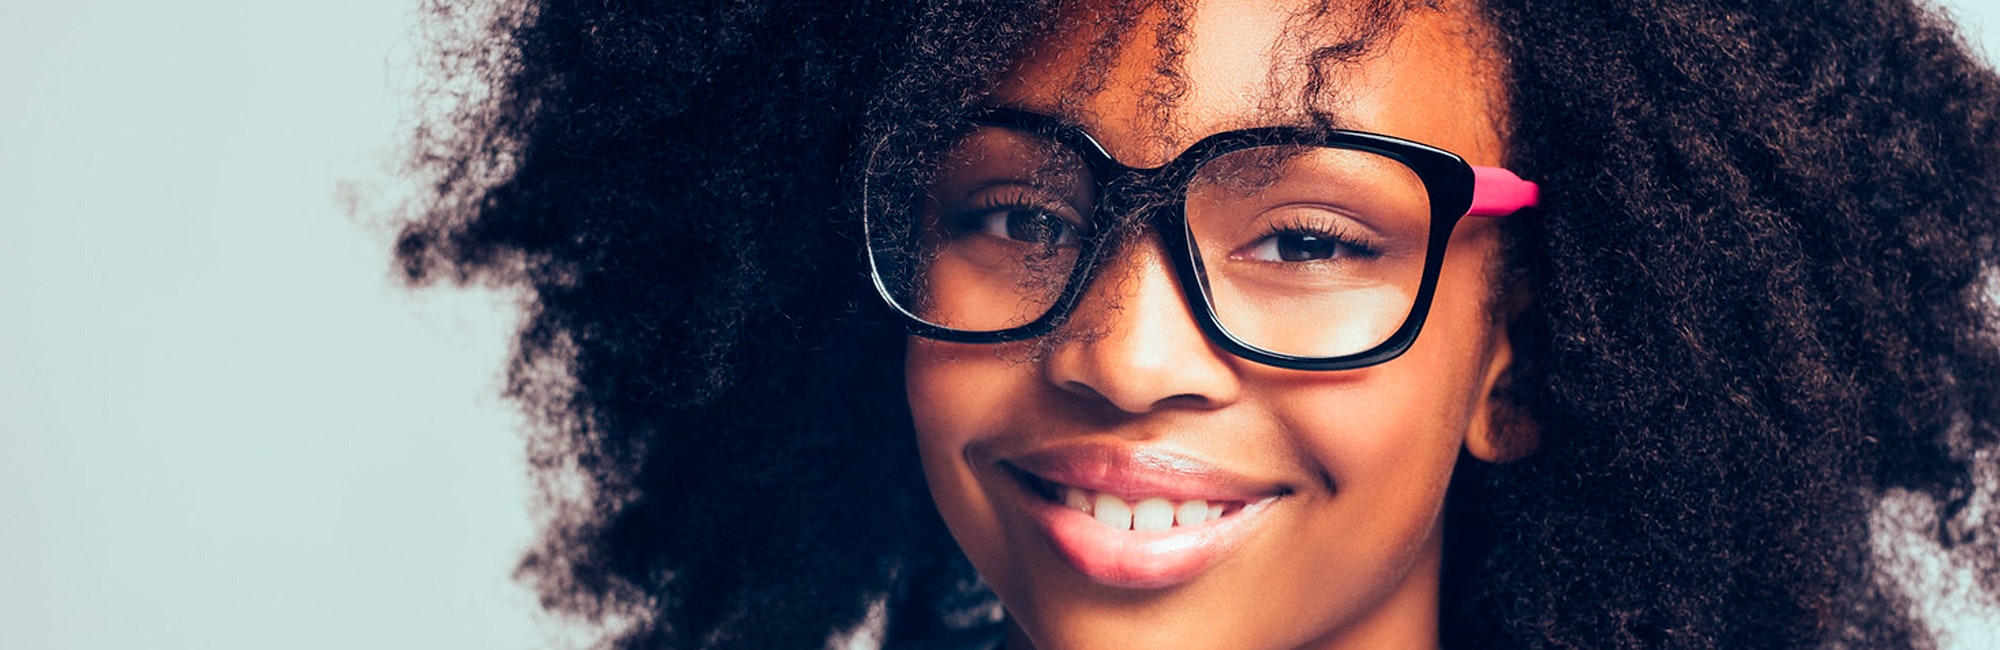 (close cutoff shot) a girl with big glasses on and a big smile